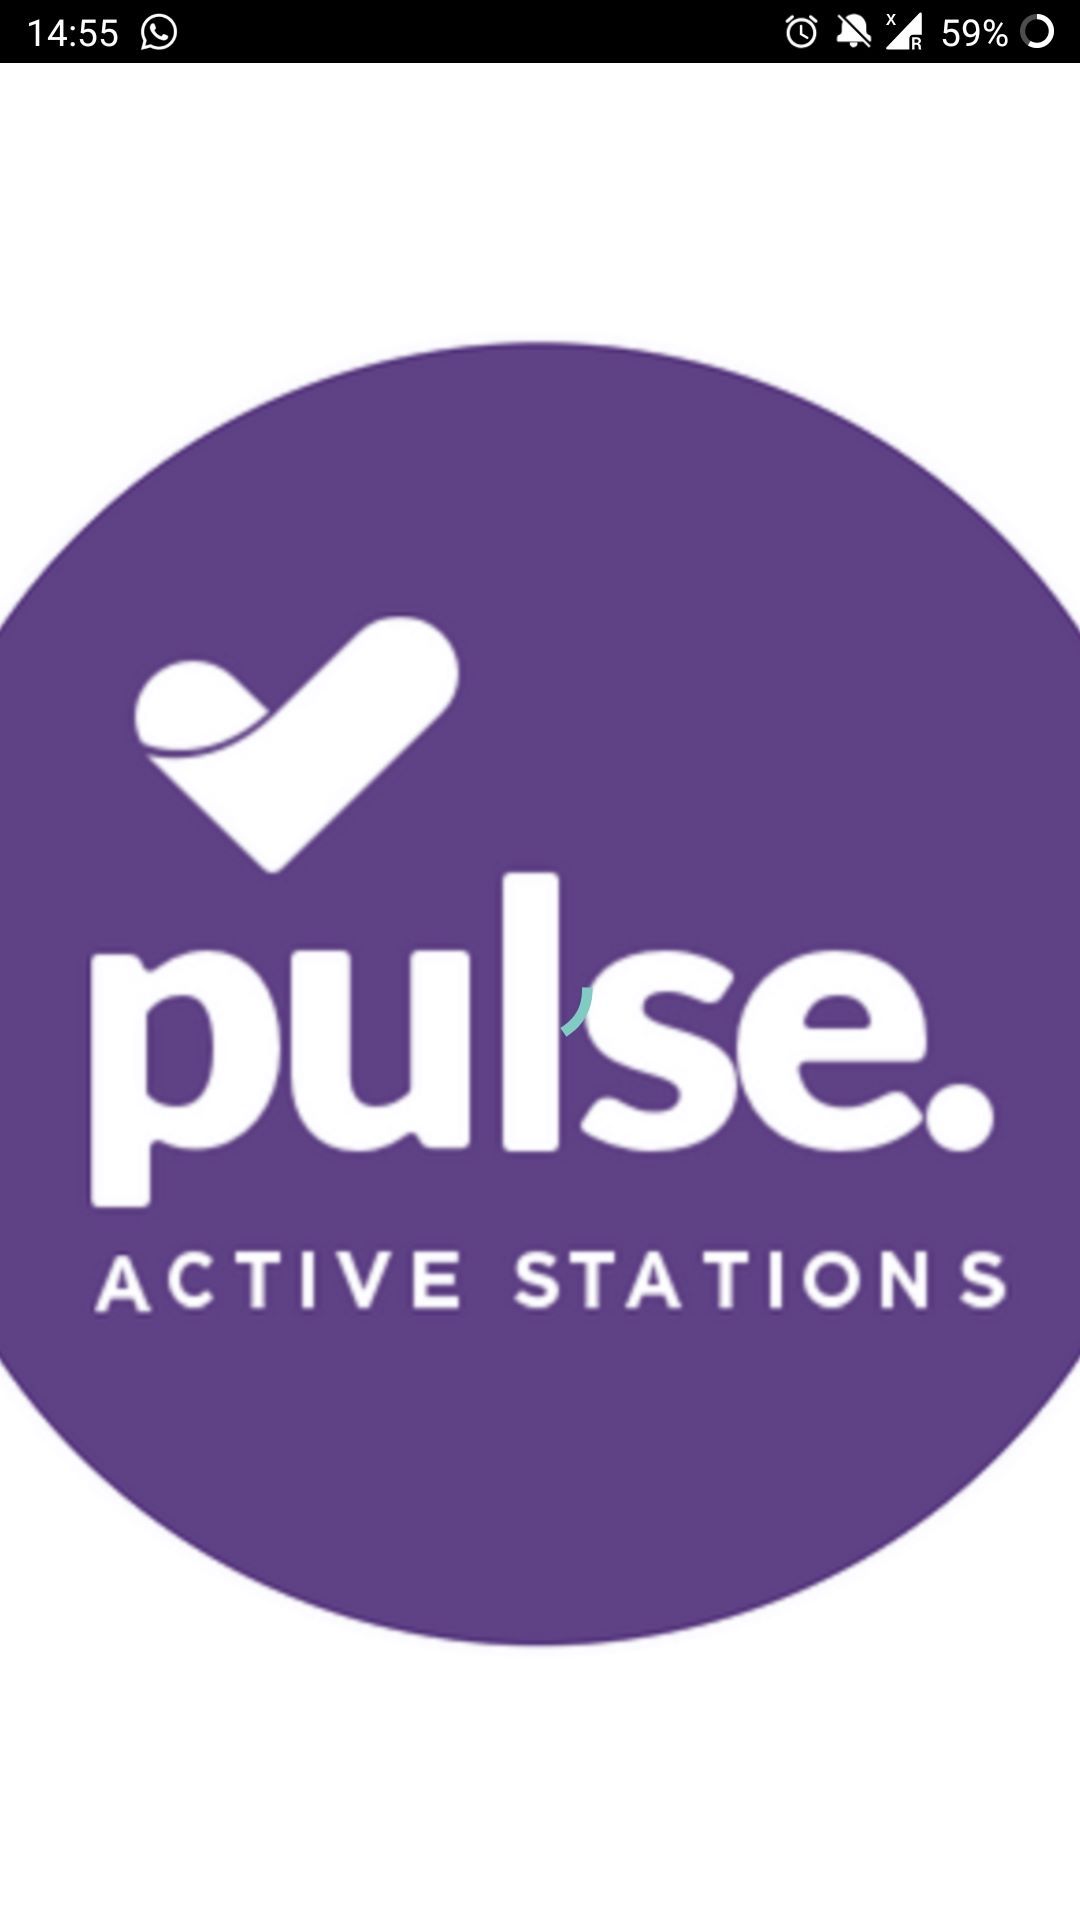 Pulse Active Stations Mobile App